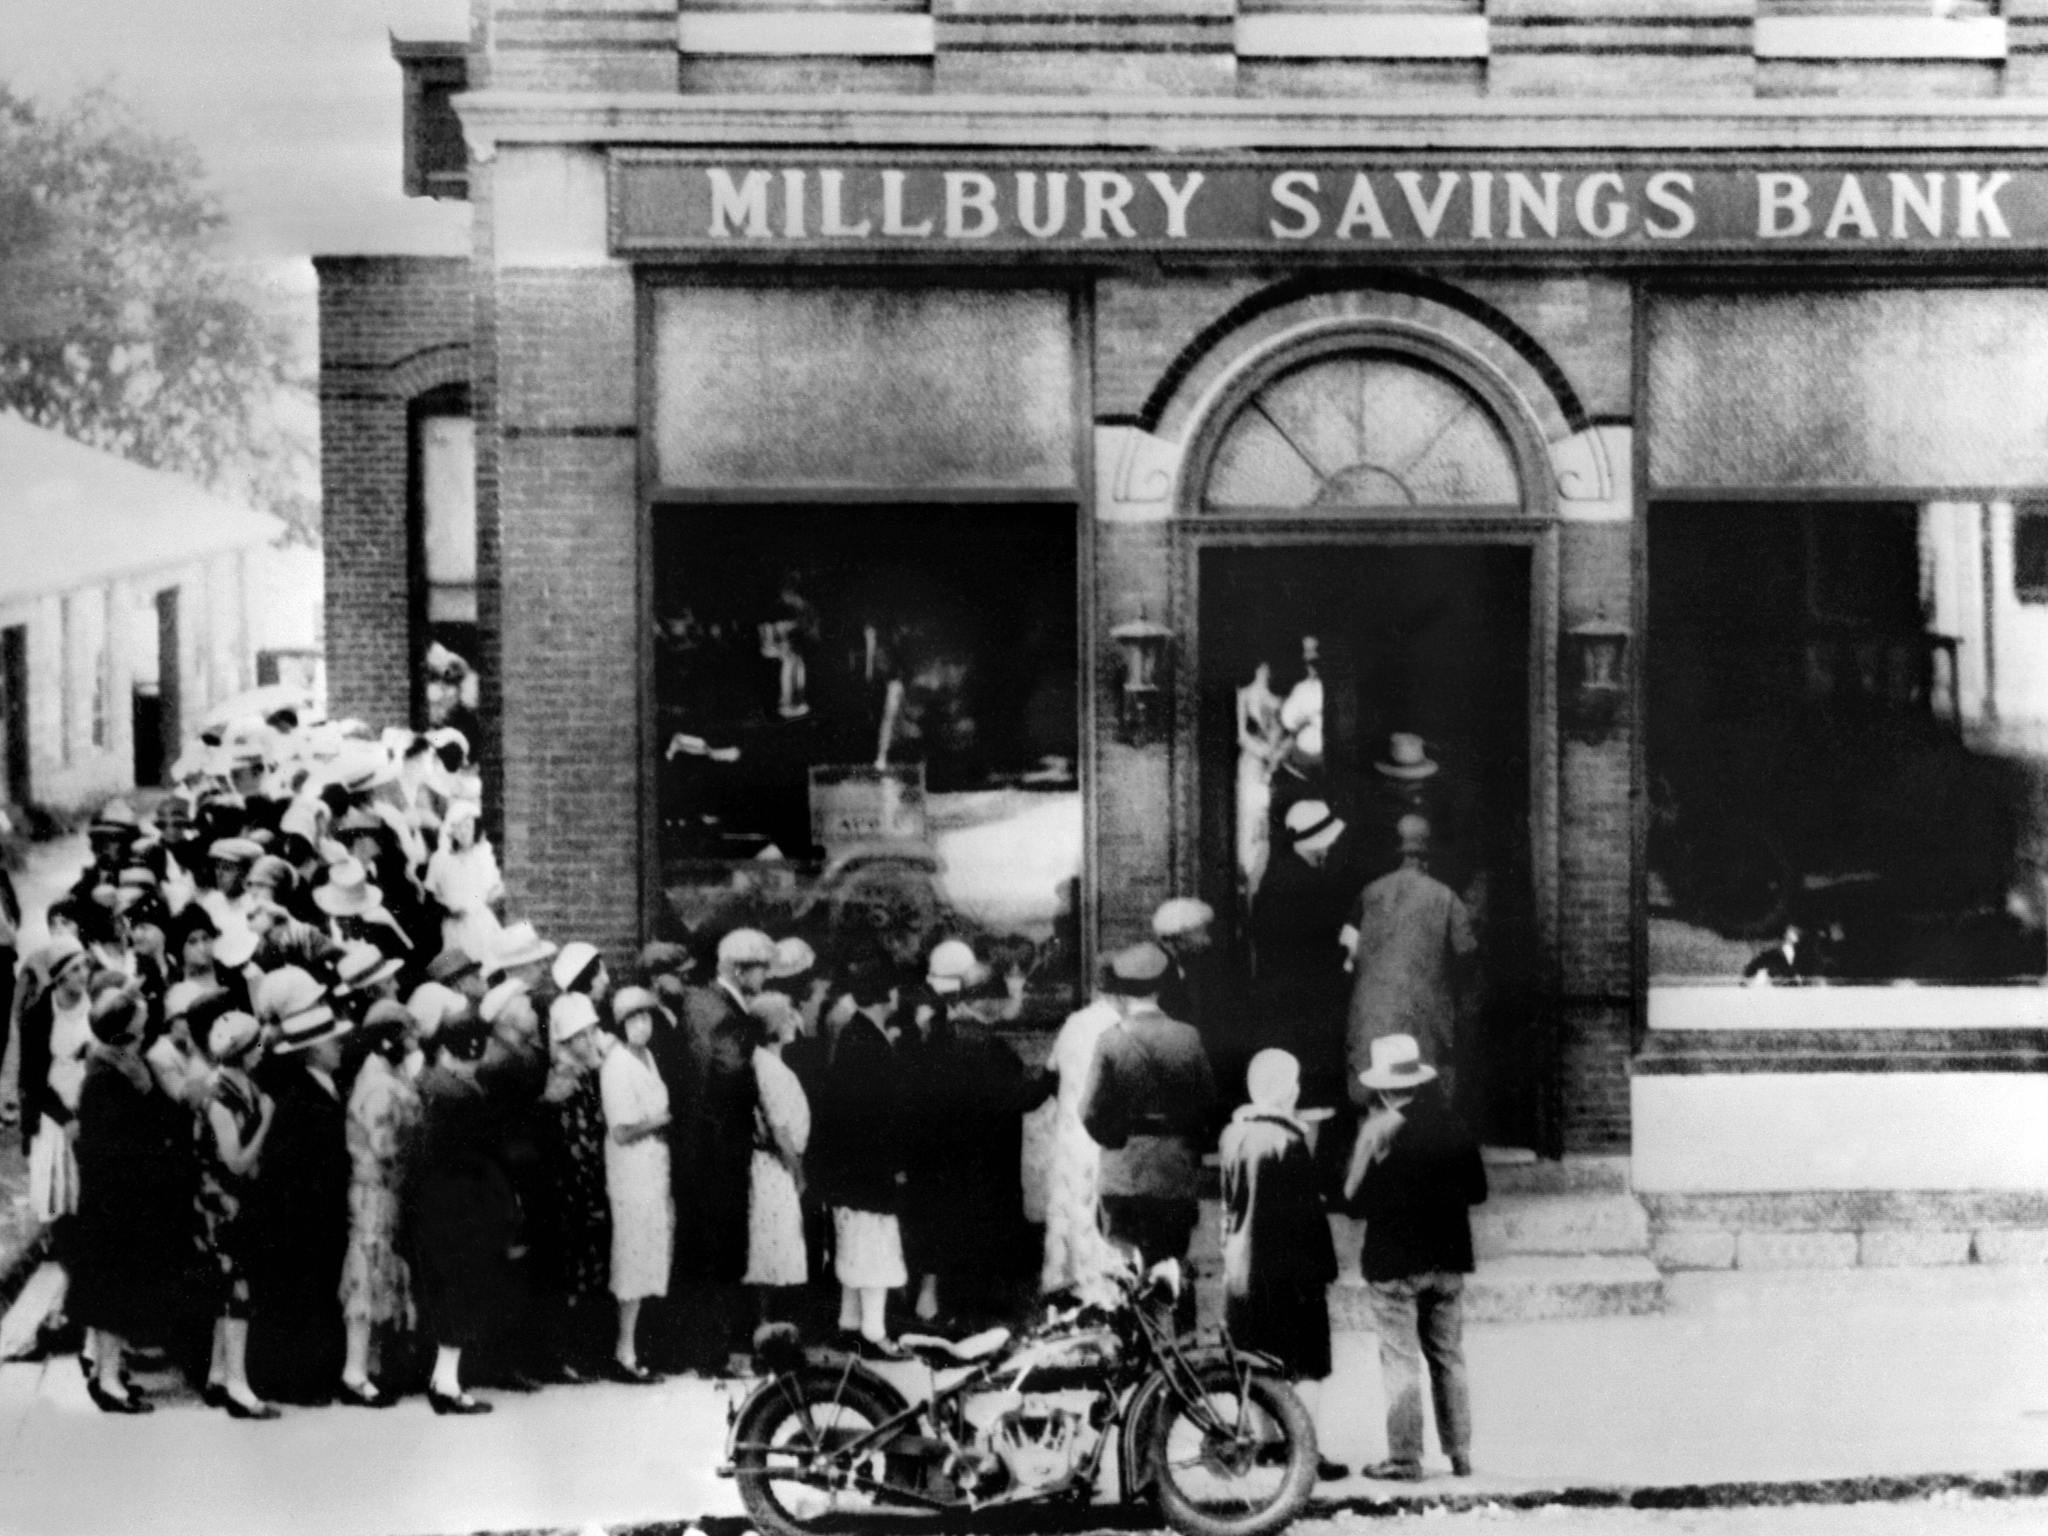 This photo dated October 24th, 1929, shows a view of people rushing to a saving bank in Millbury, Massachusetts as the stock market on Wall Street crashed, sparking a run on banks that spread across the country.